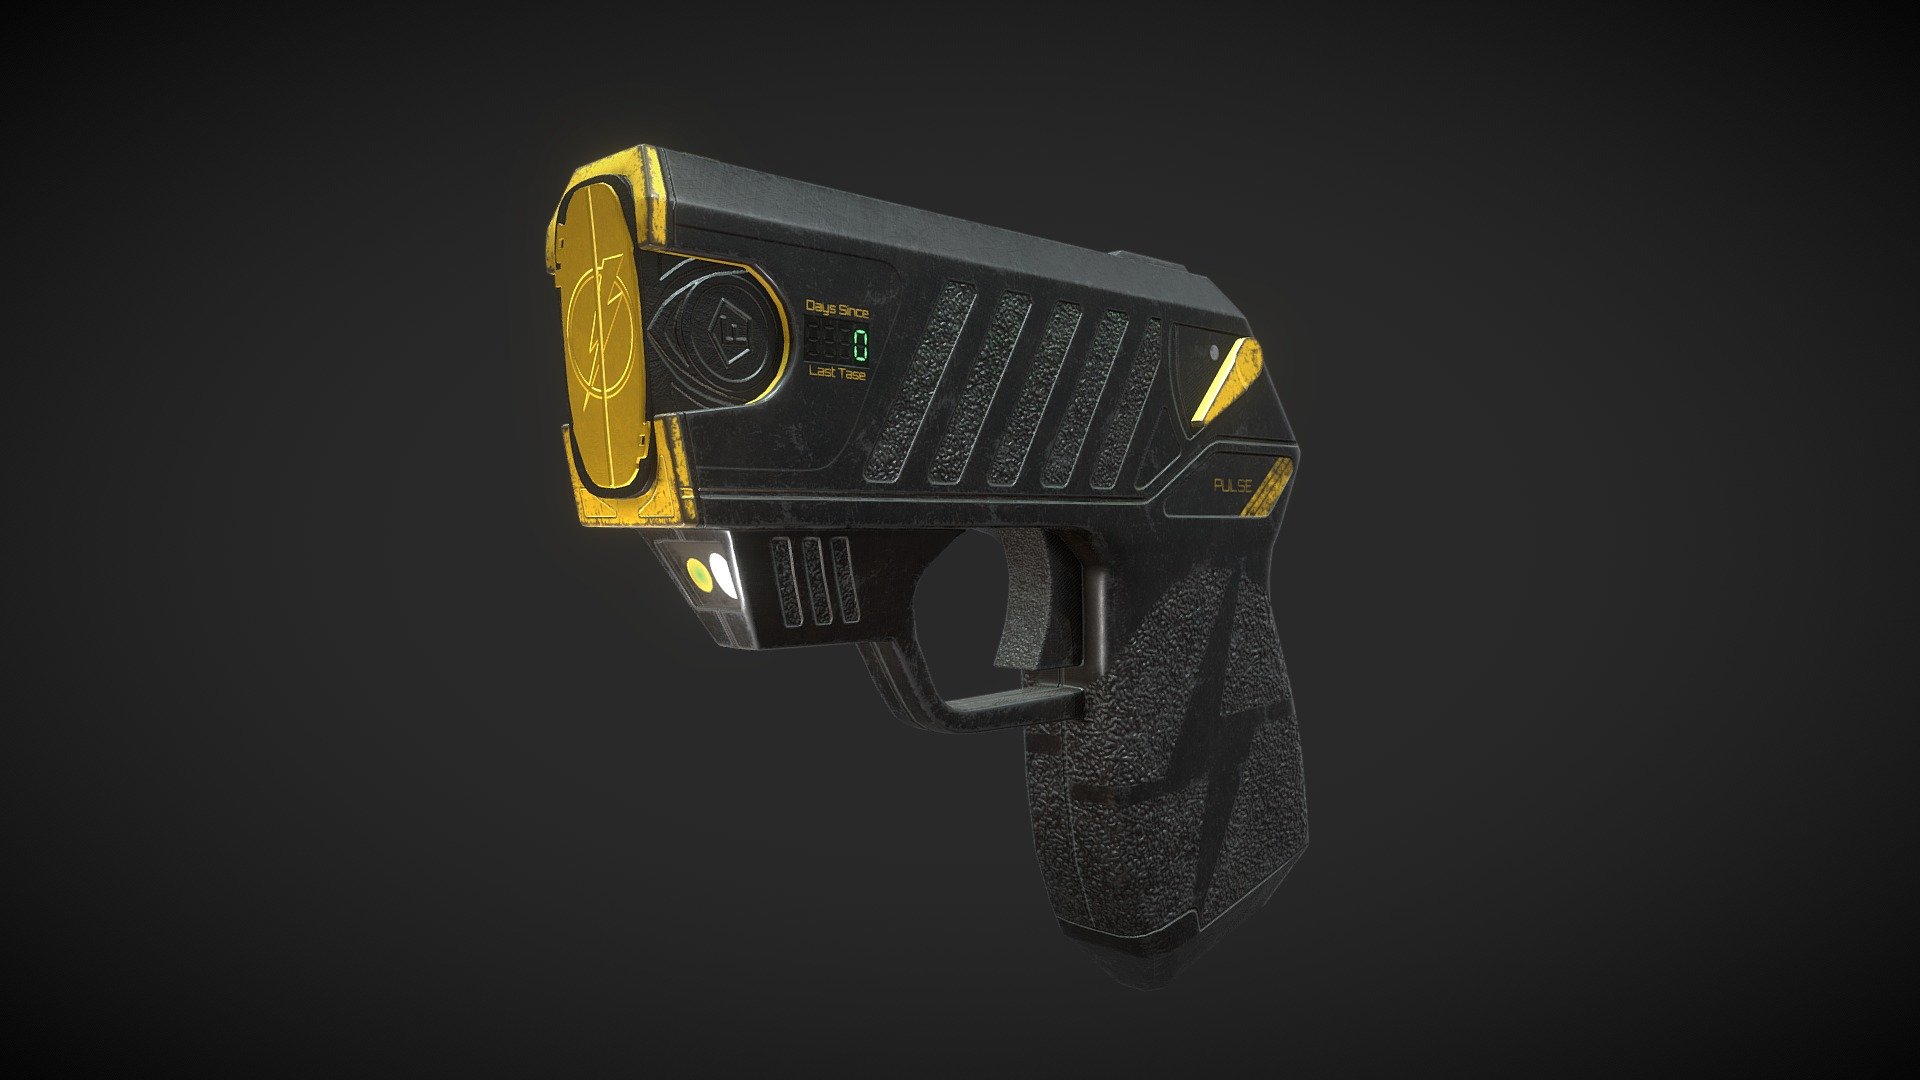 This model is a WIP of a TASER Pulse. This week, I applied textures and created a story element to go along with the model 3d model